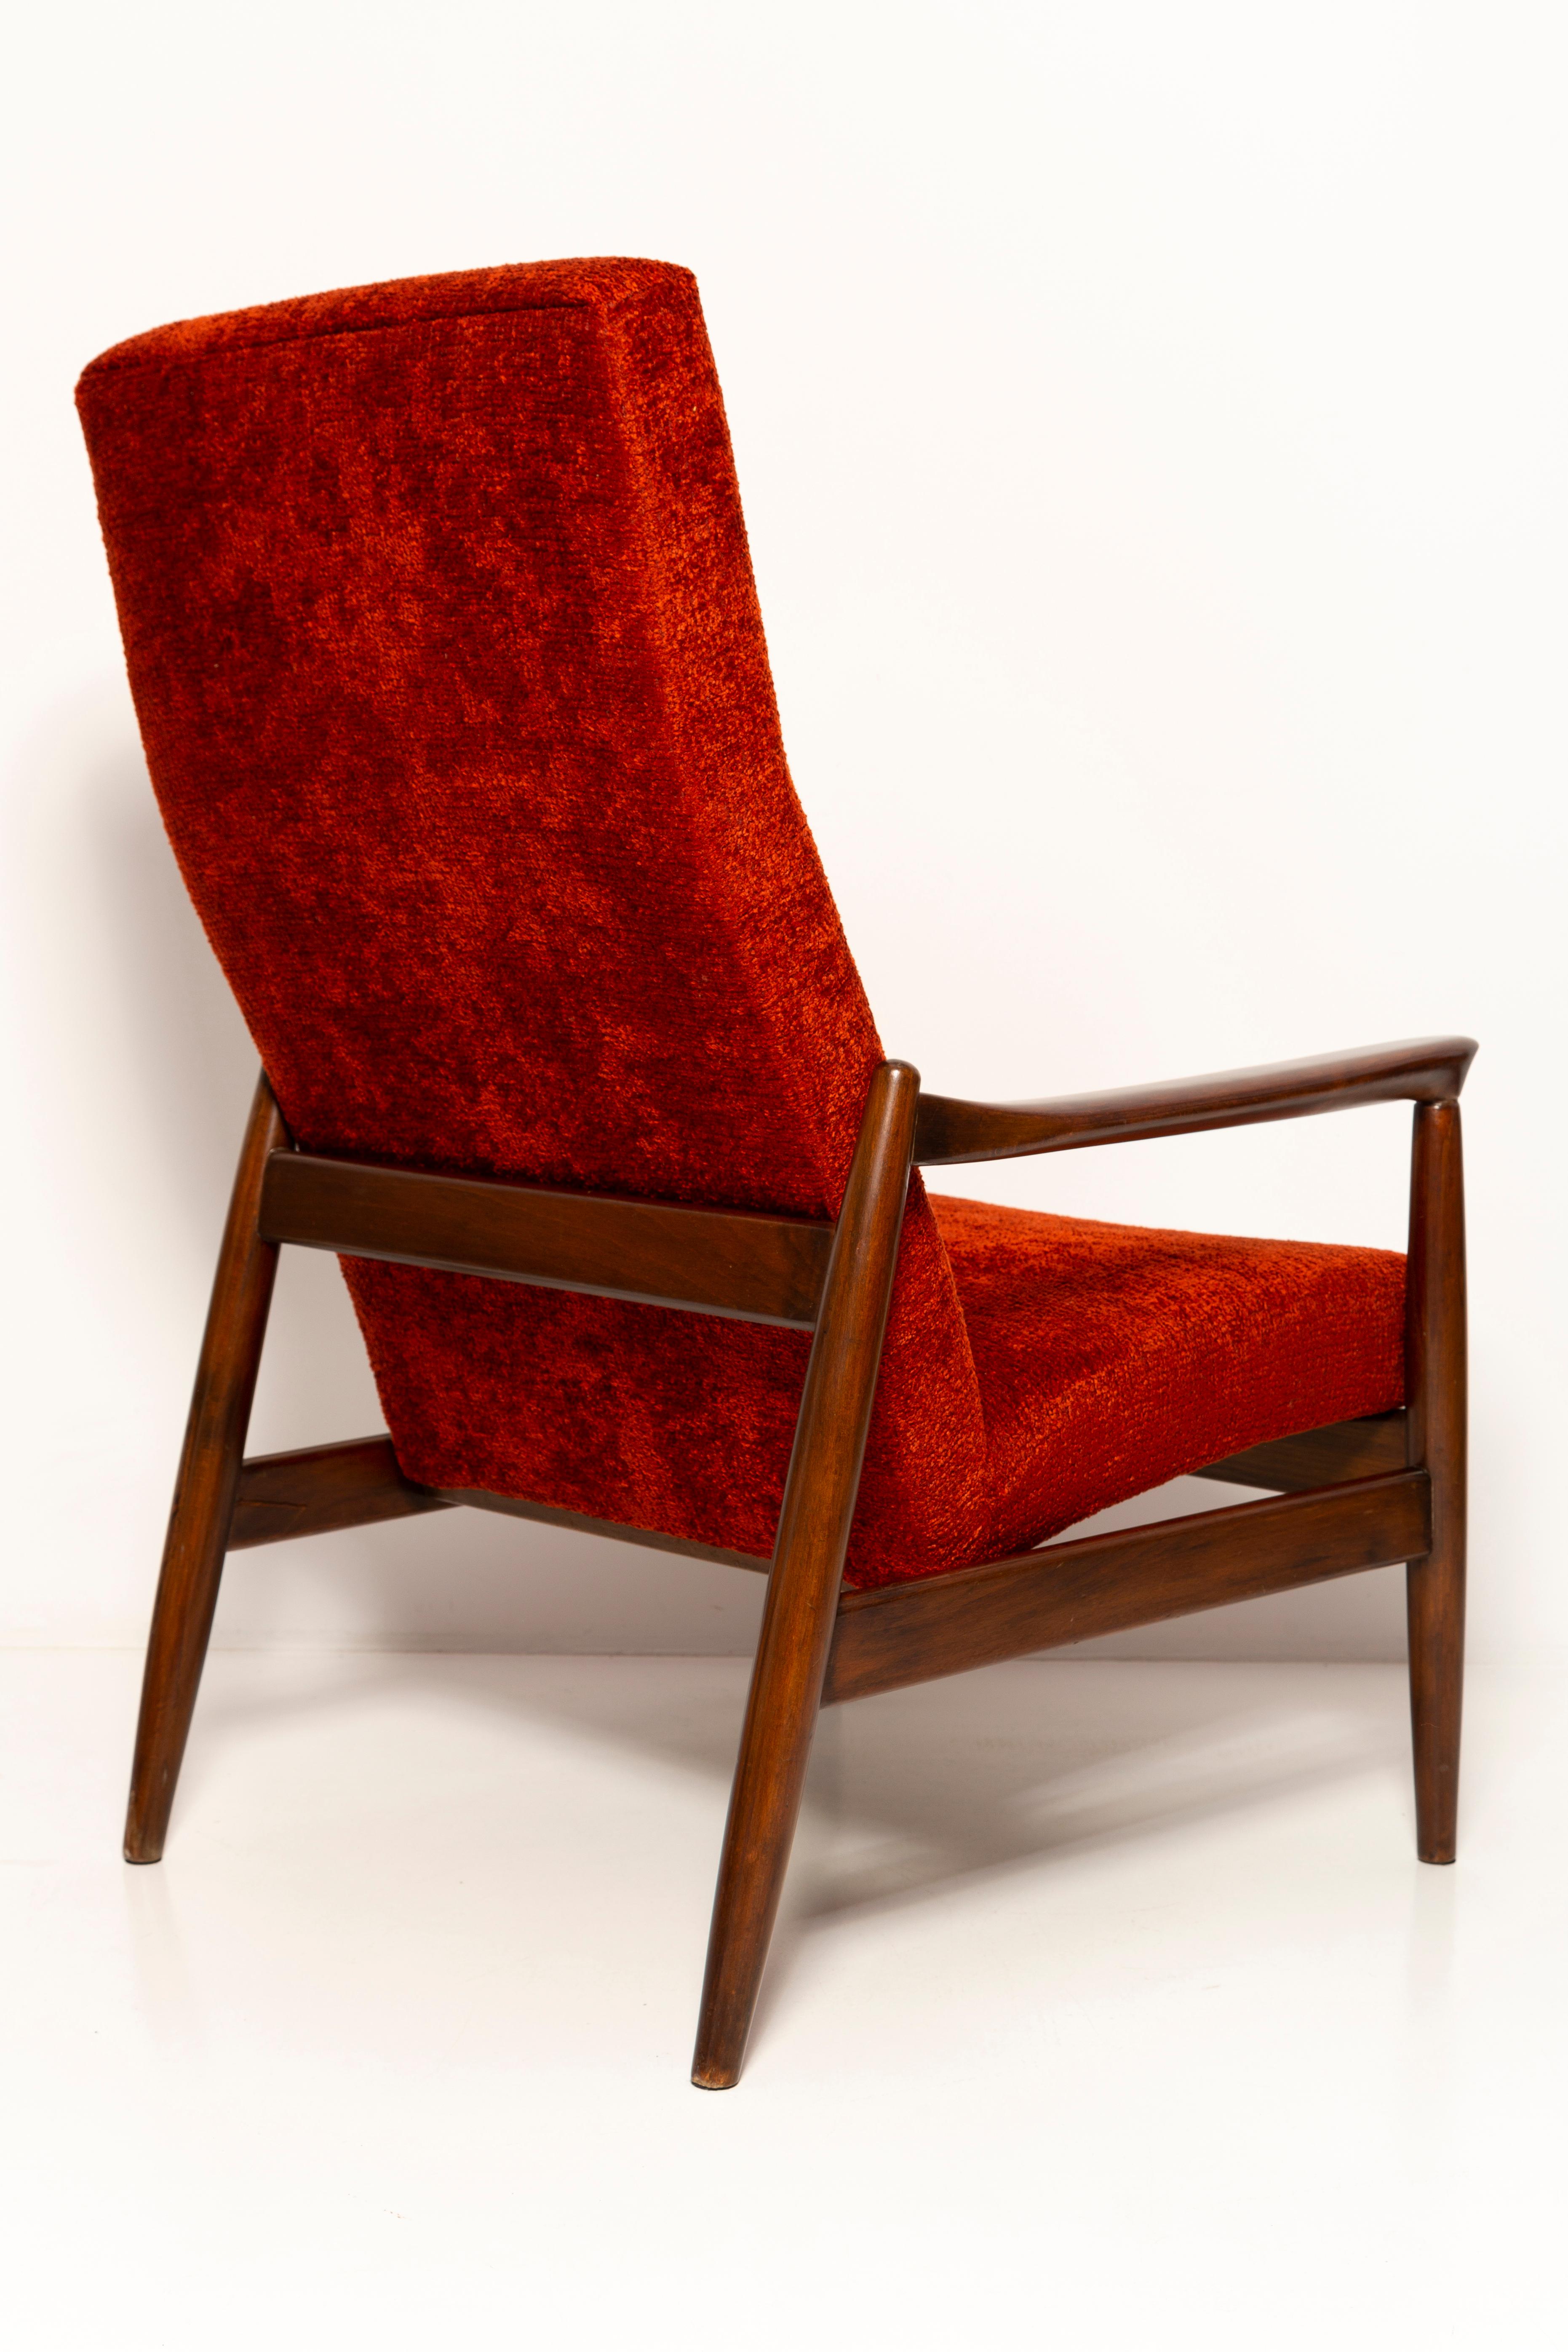 Fabric Two Mid Century Burgundy Wine Armchairs GFM-64 High, Edmund Homa, Europe, 1960s For Sale